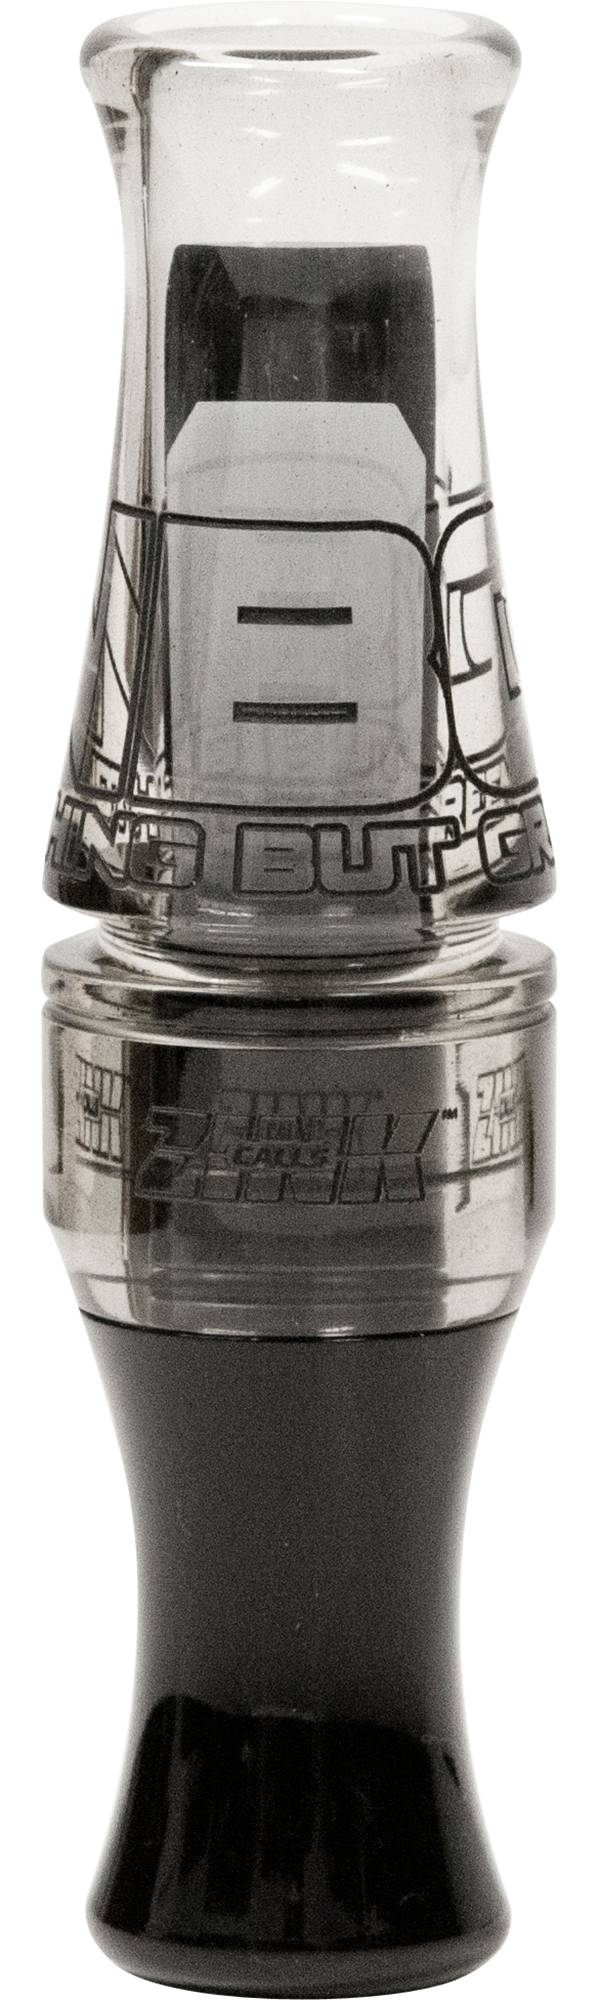 Zink Polycarbonate Gunsmoke Nothing But Green Duck Call product image